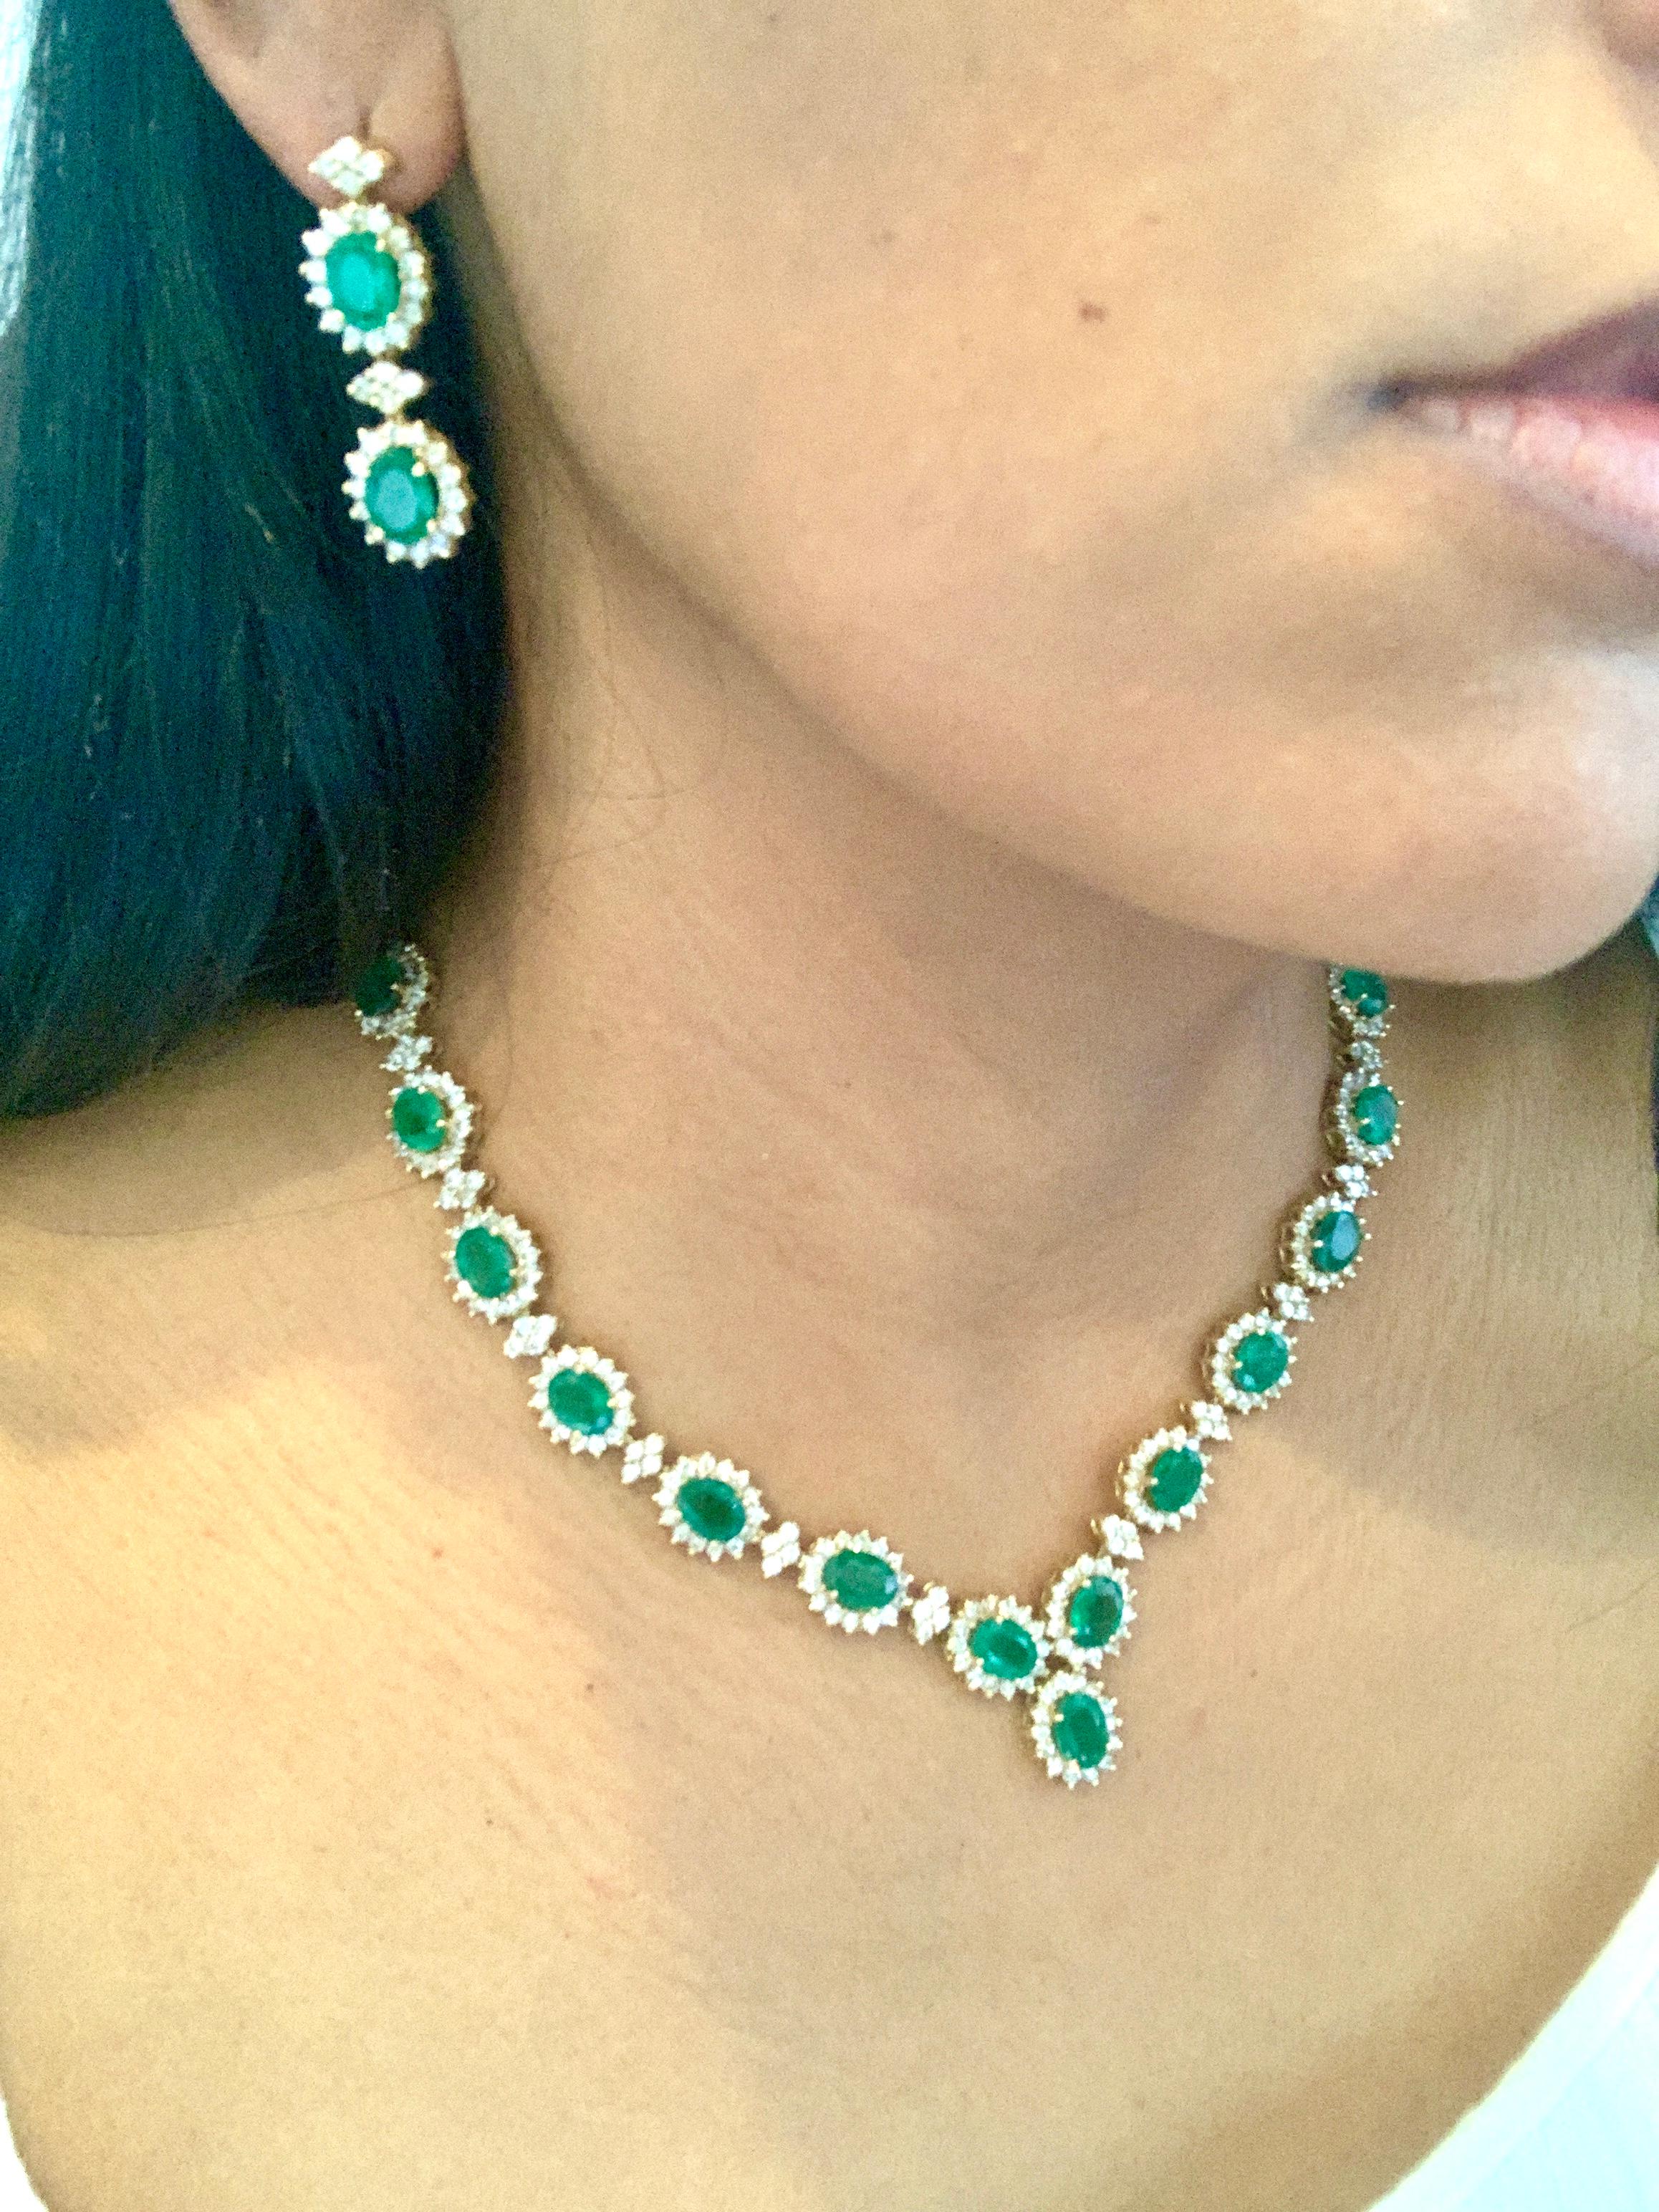 37 Ct Oval Shape Natural  Emerald & 22 Carat Diamond Necklace & Earring  Suite For Sale 11